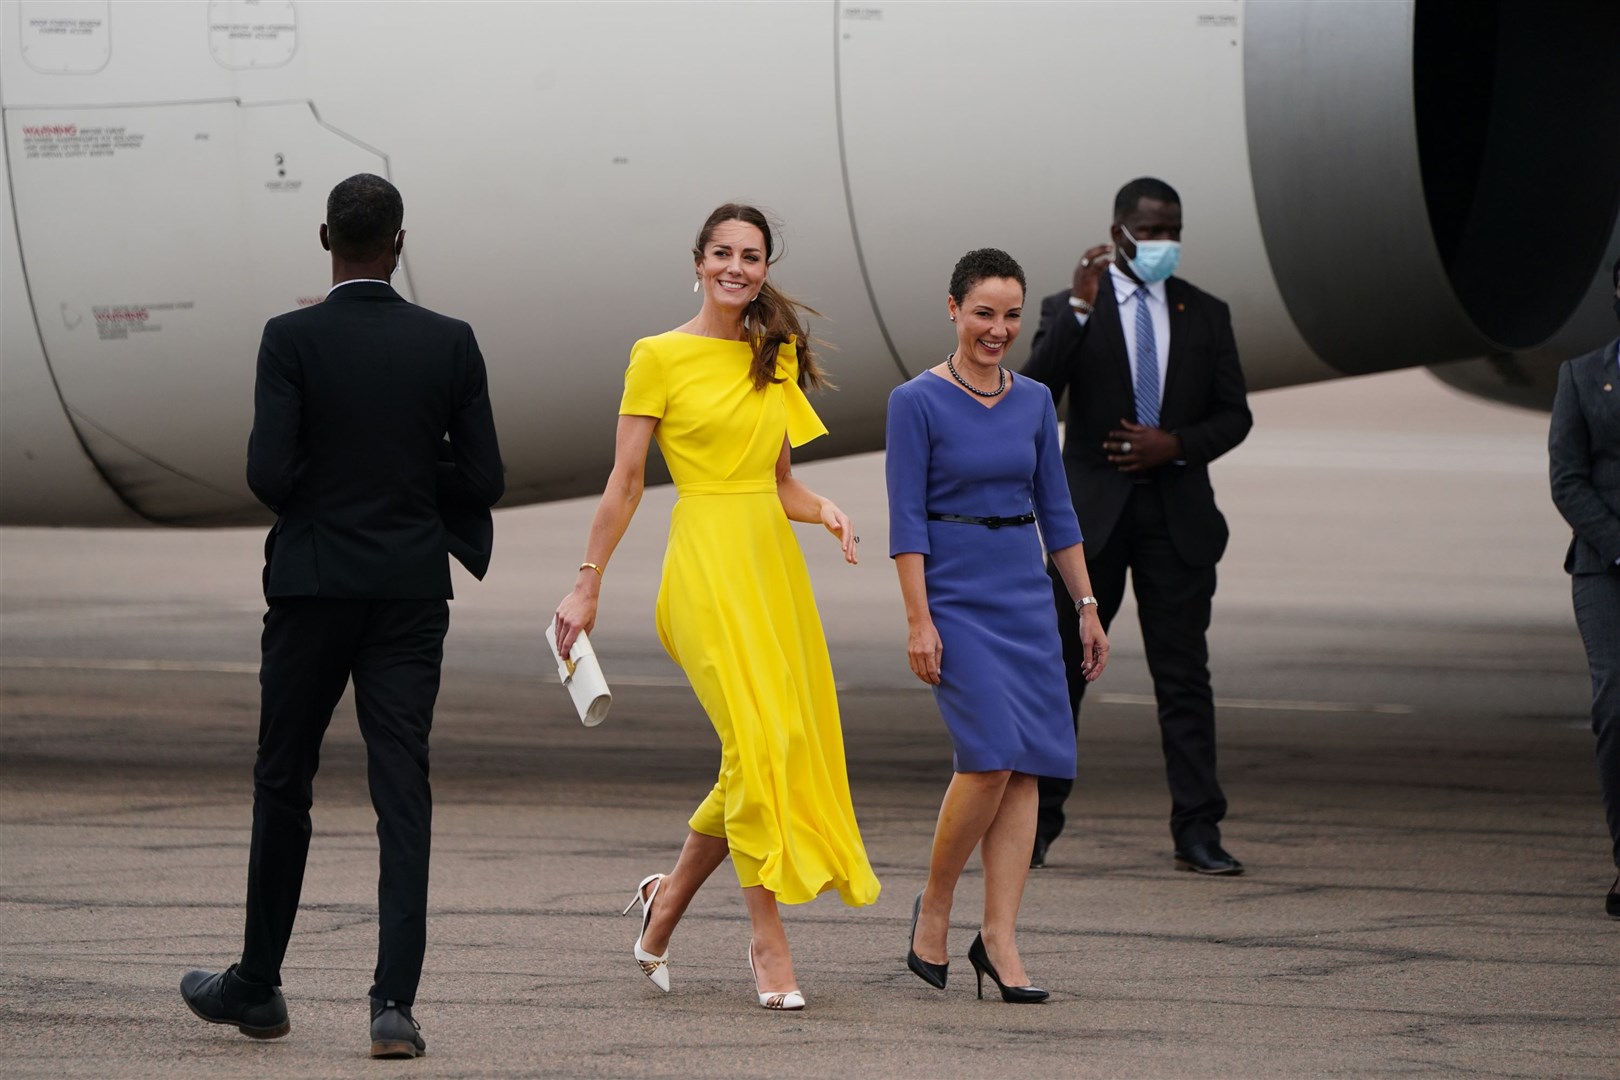 The Princess of Wales arrives at Norman Manley International Airport in Kingston, Jamaica (Jane Barlow/PA)